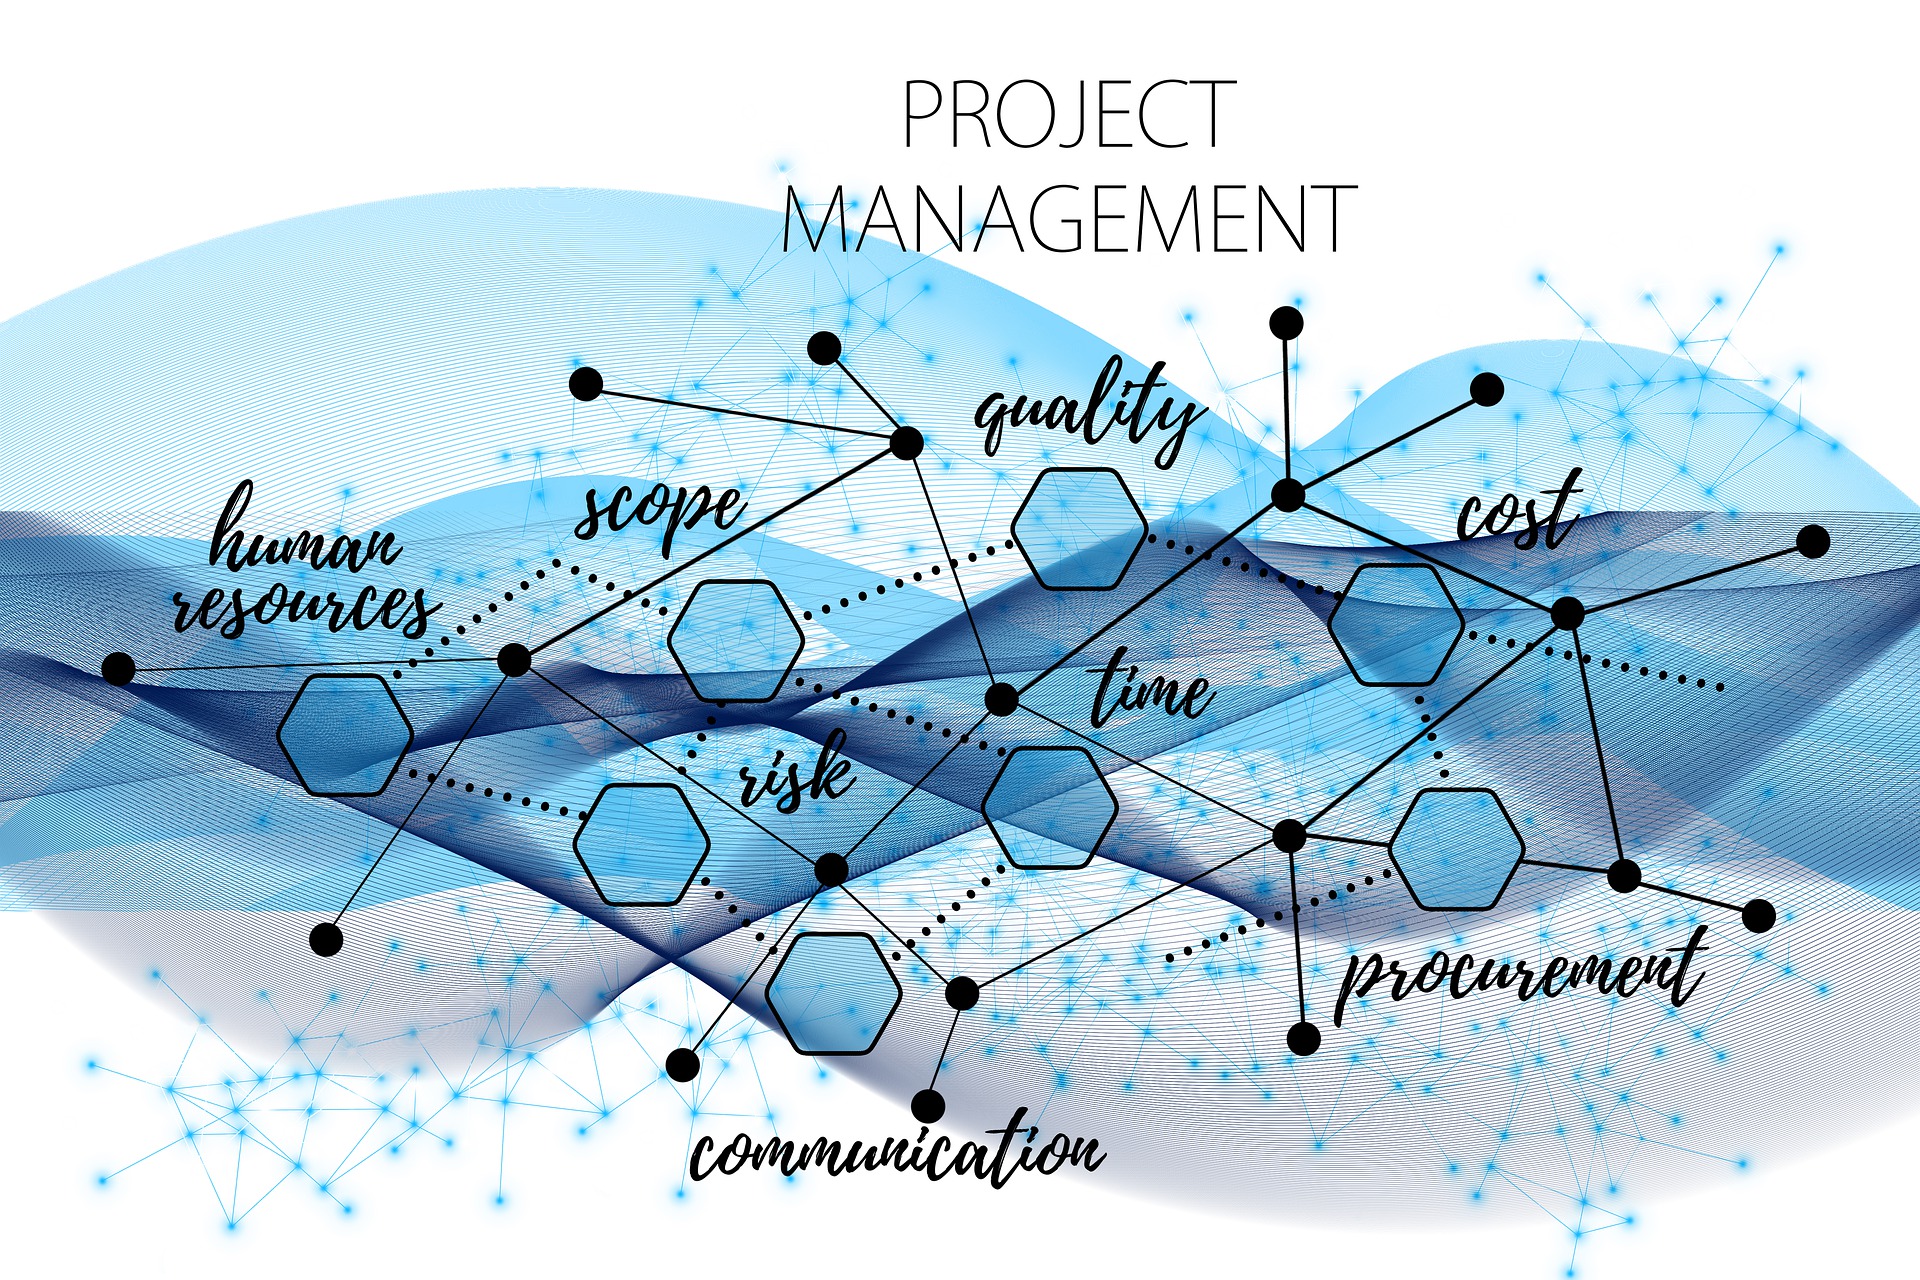 Project management components graphic to help explain what does a project manager do